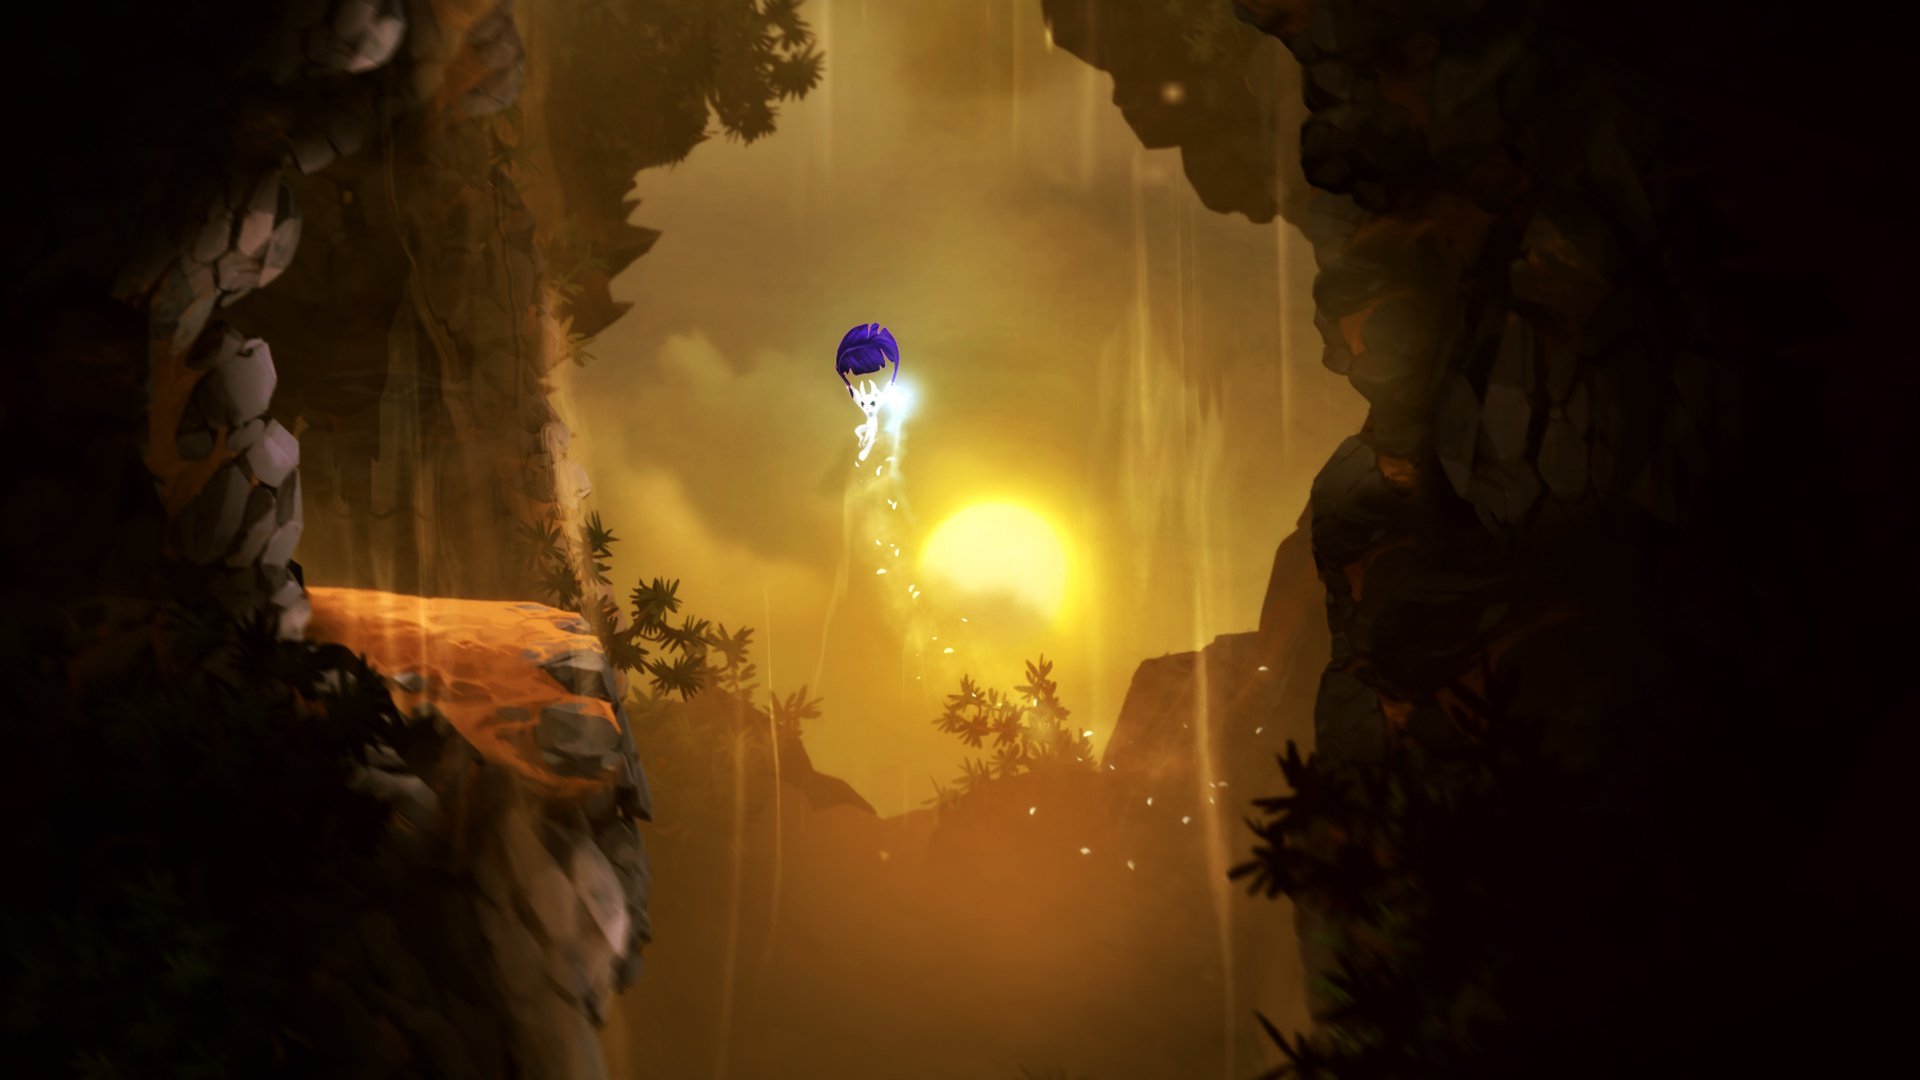 Ori And The Blind Forest Full HD Wallpaper Background